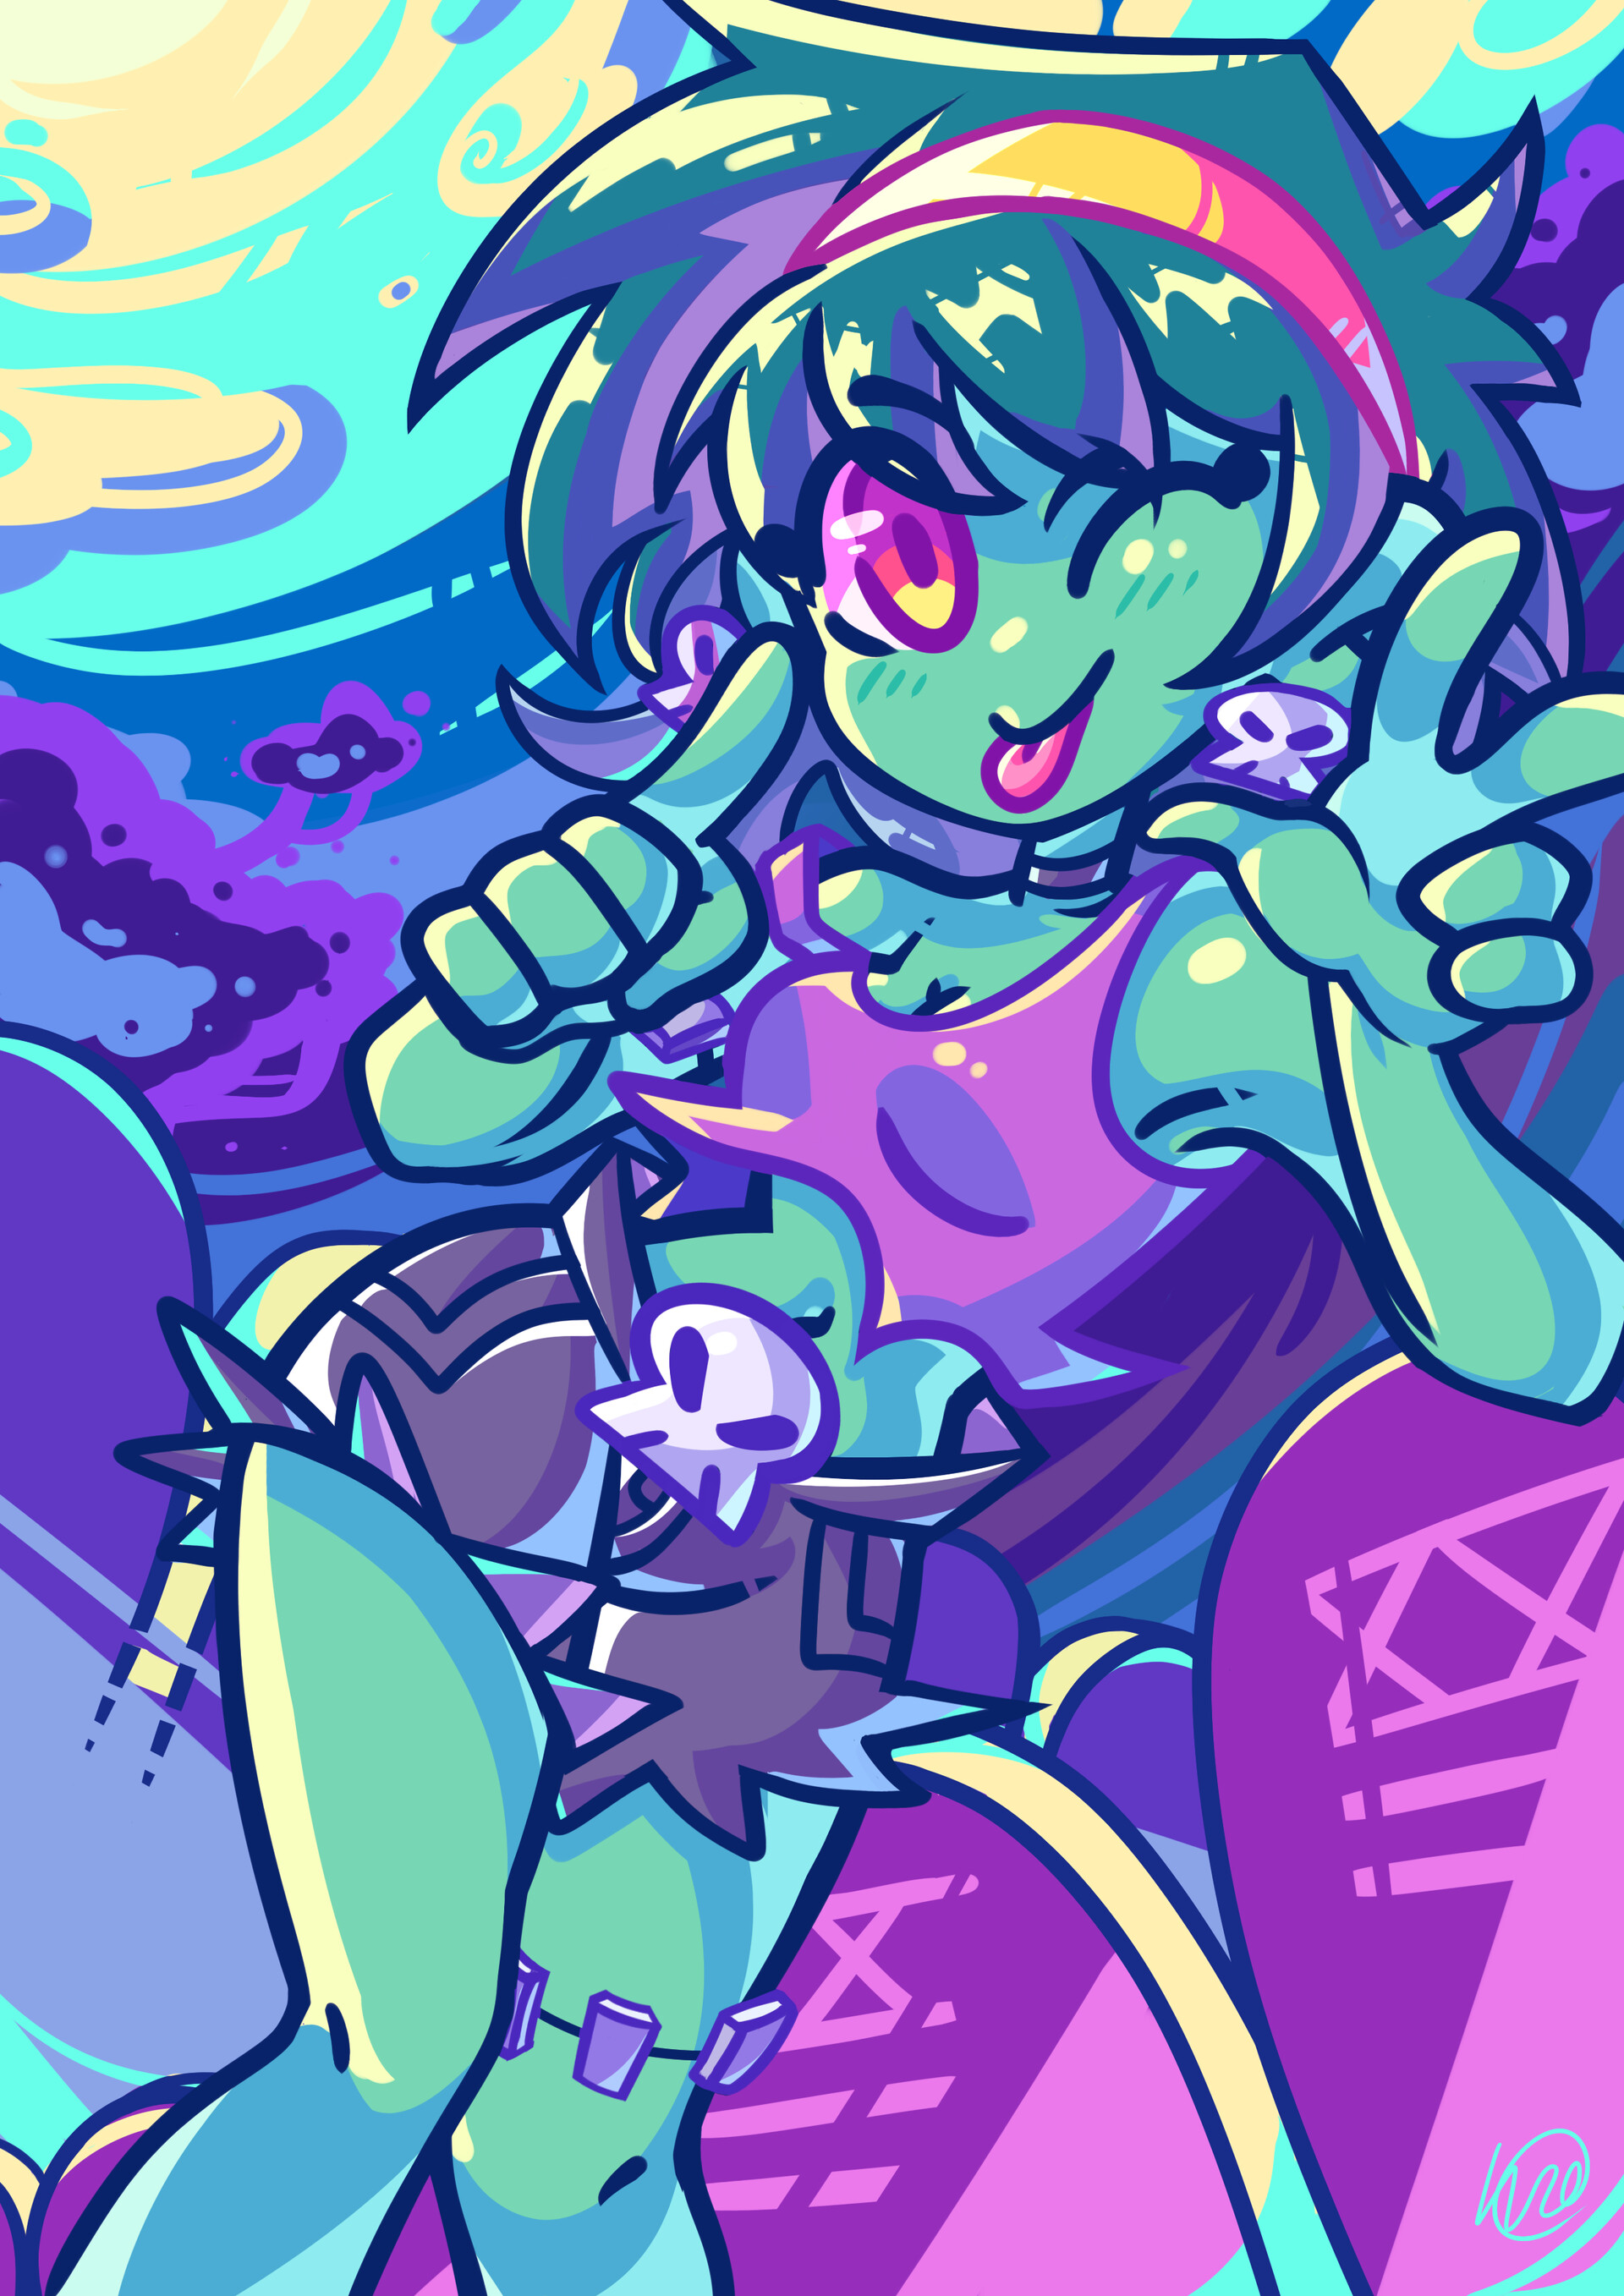 Fanart of Rottytops from the game series "Shantae.